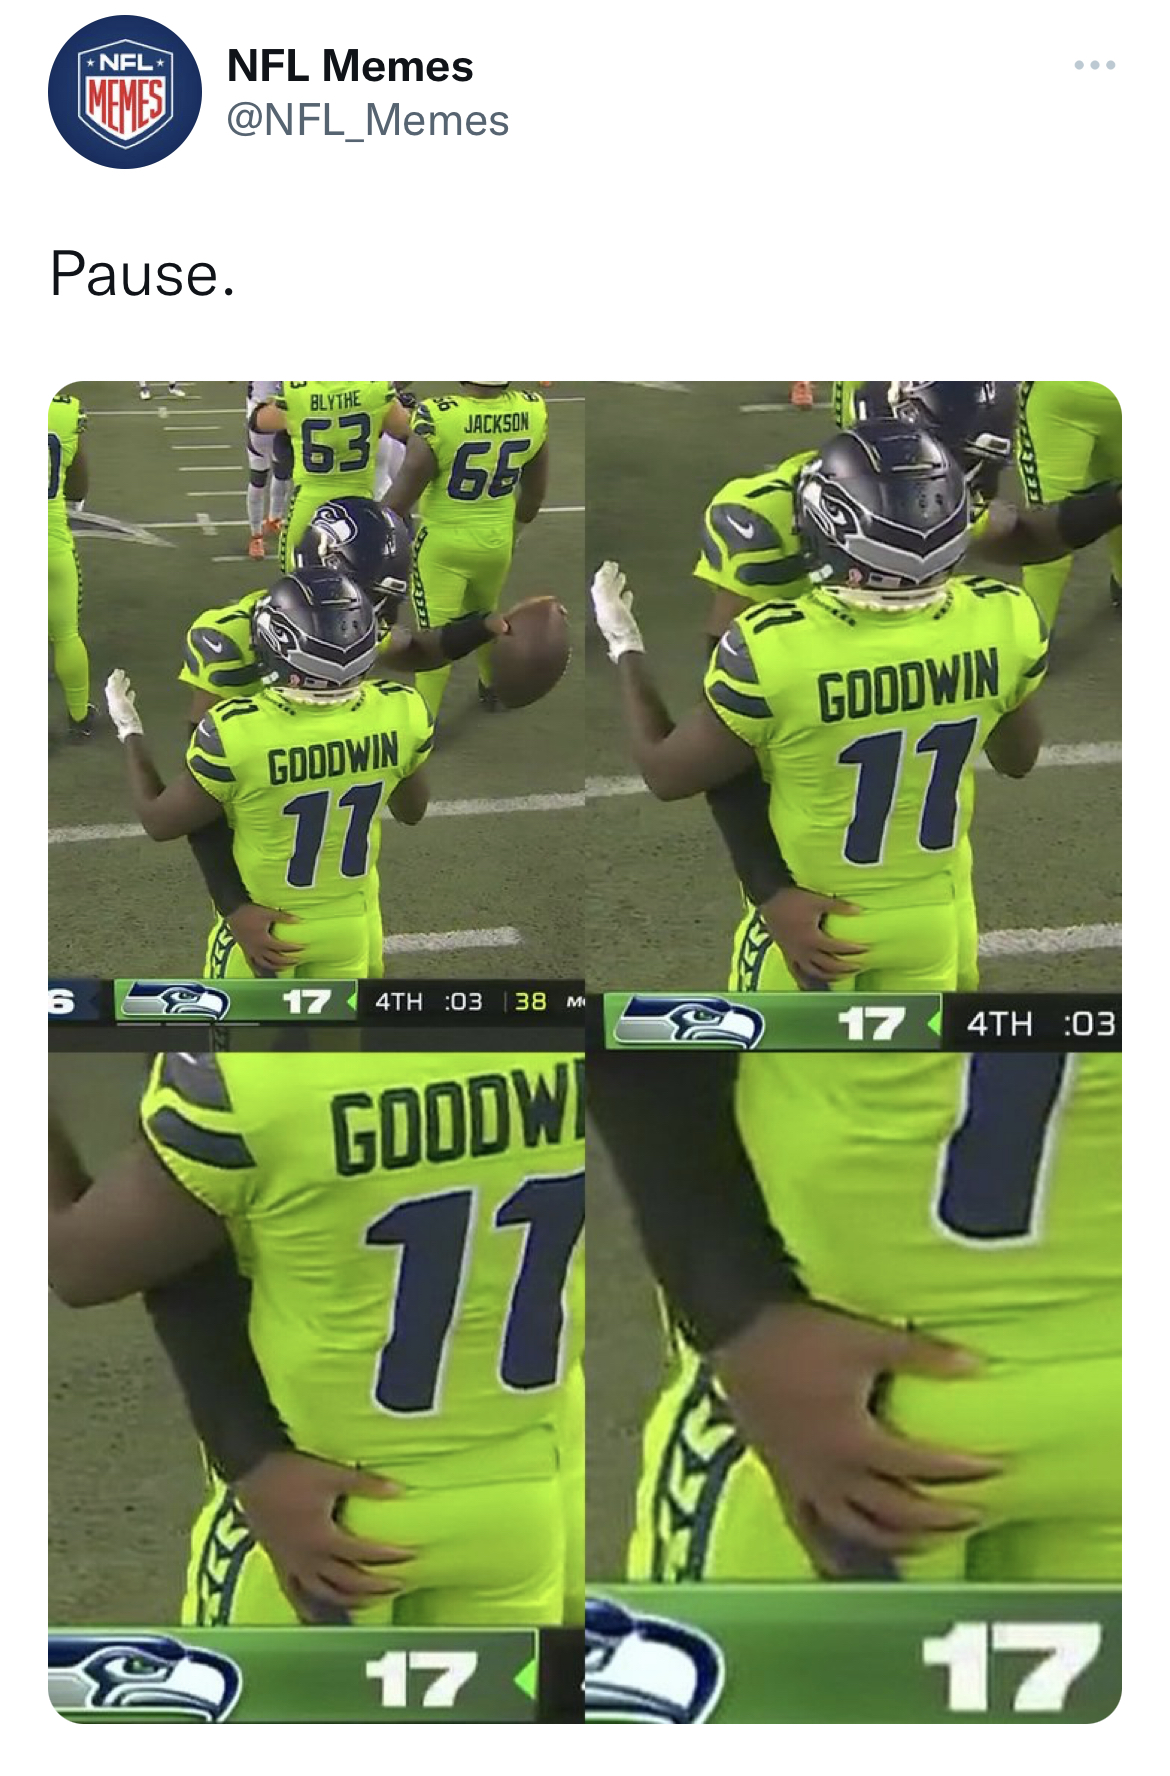 salty and savage nfl memes - player - Nfl Nfl Memes Pause. 63 Goodwin 11 Jackson 66 17 4TH 03 38 Goodw 17 17 Goodwin 17 17 4TH 03 17